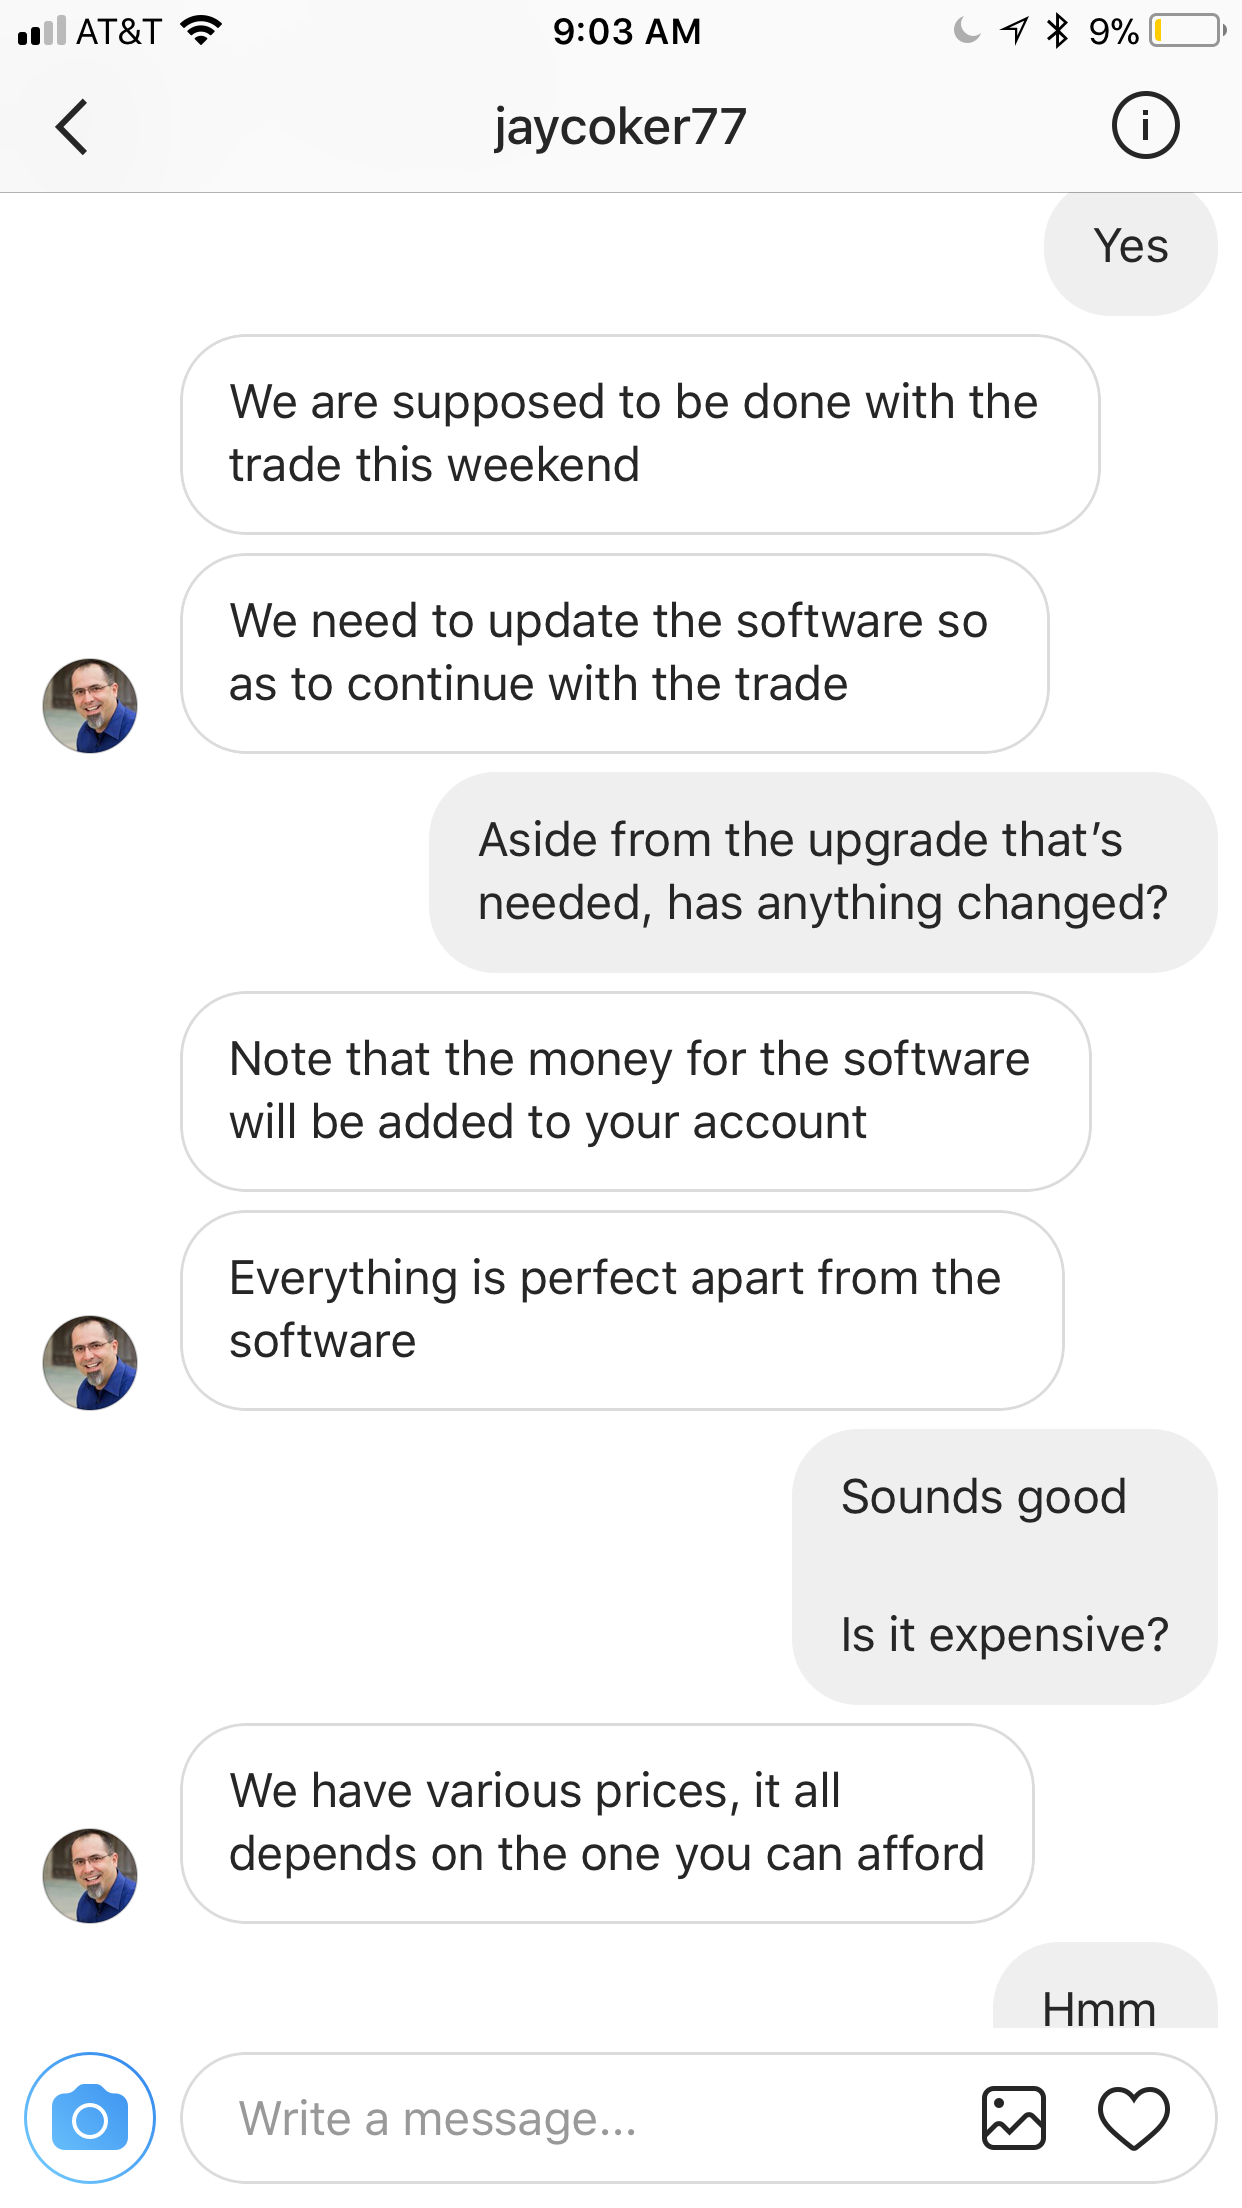 Convo where he wants me to buy new software